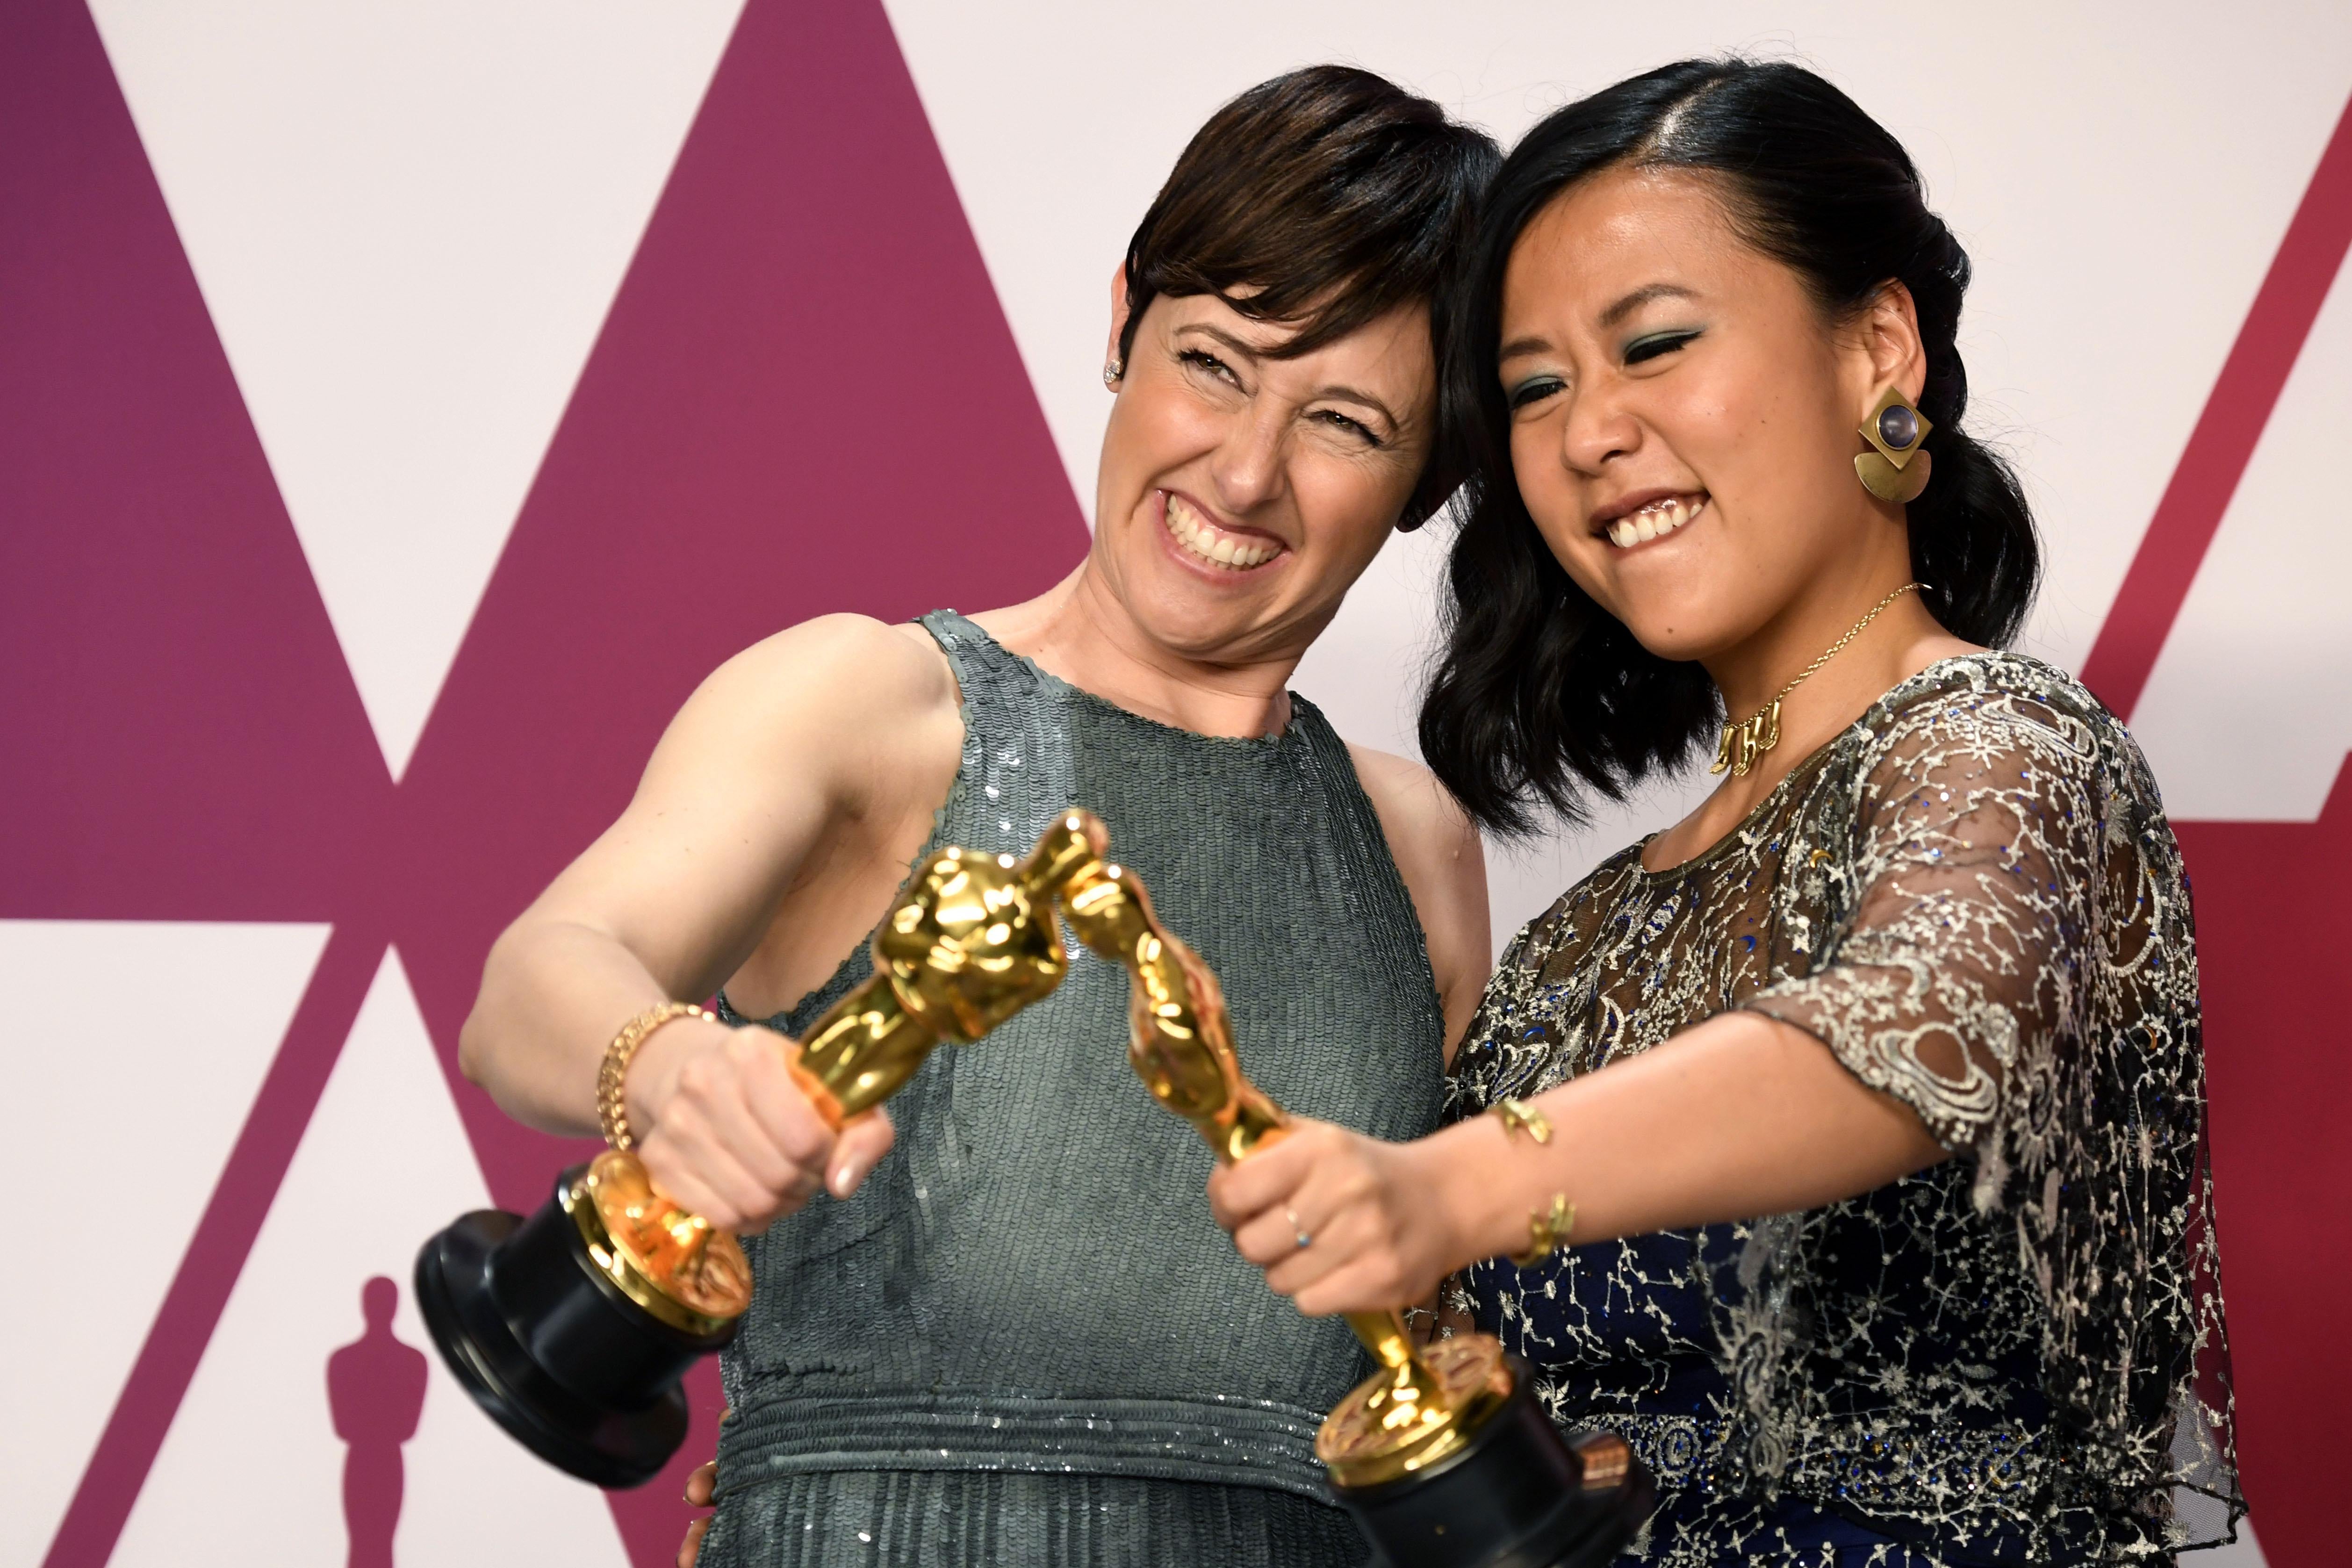 Two women hold Oscar statuettes.